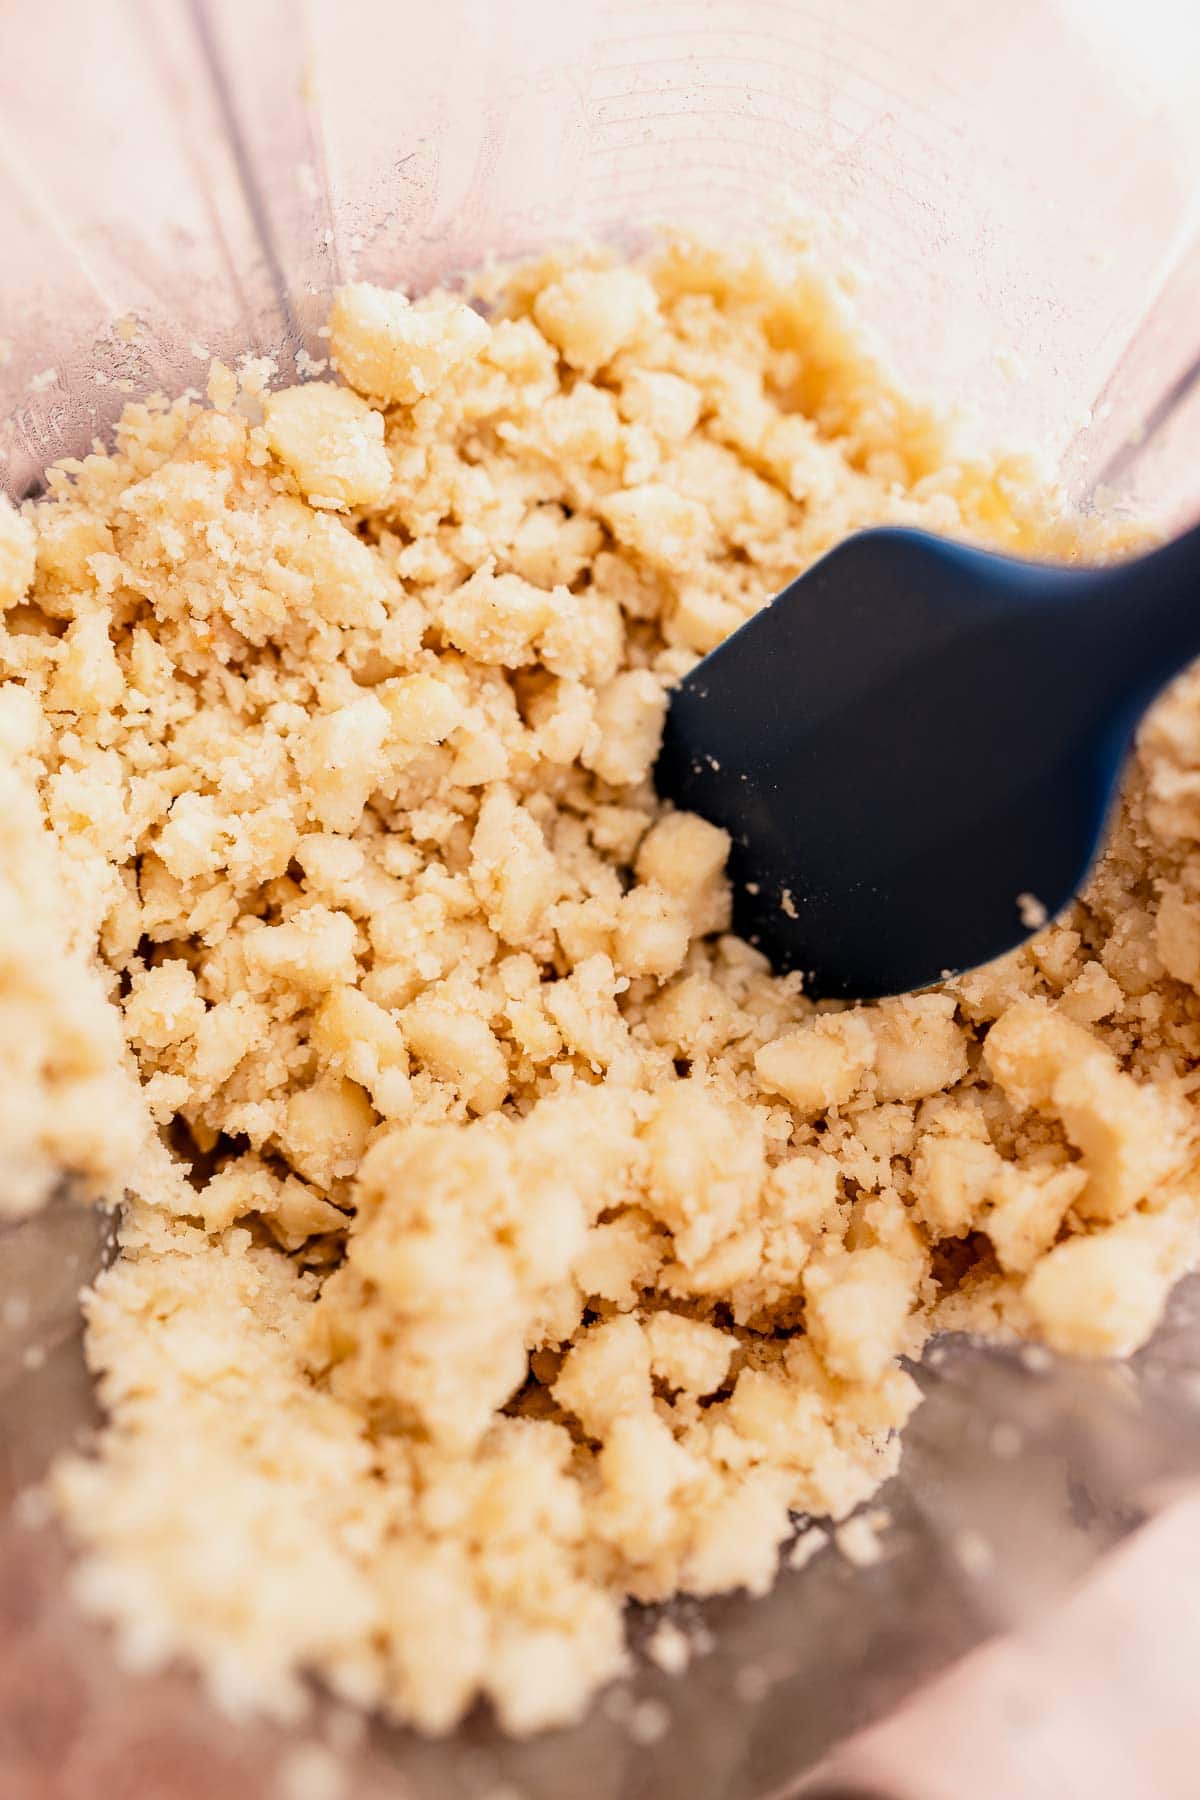 Close-up of crumbled dough with macadamia nut butter in a mixing bowl with a black spatula.